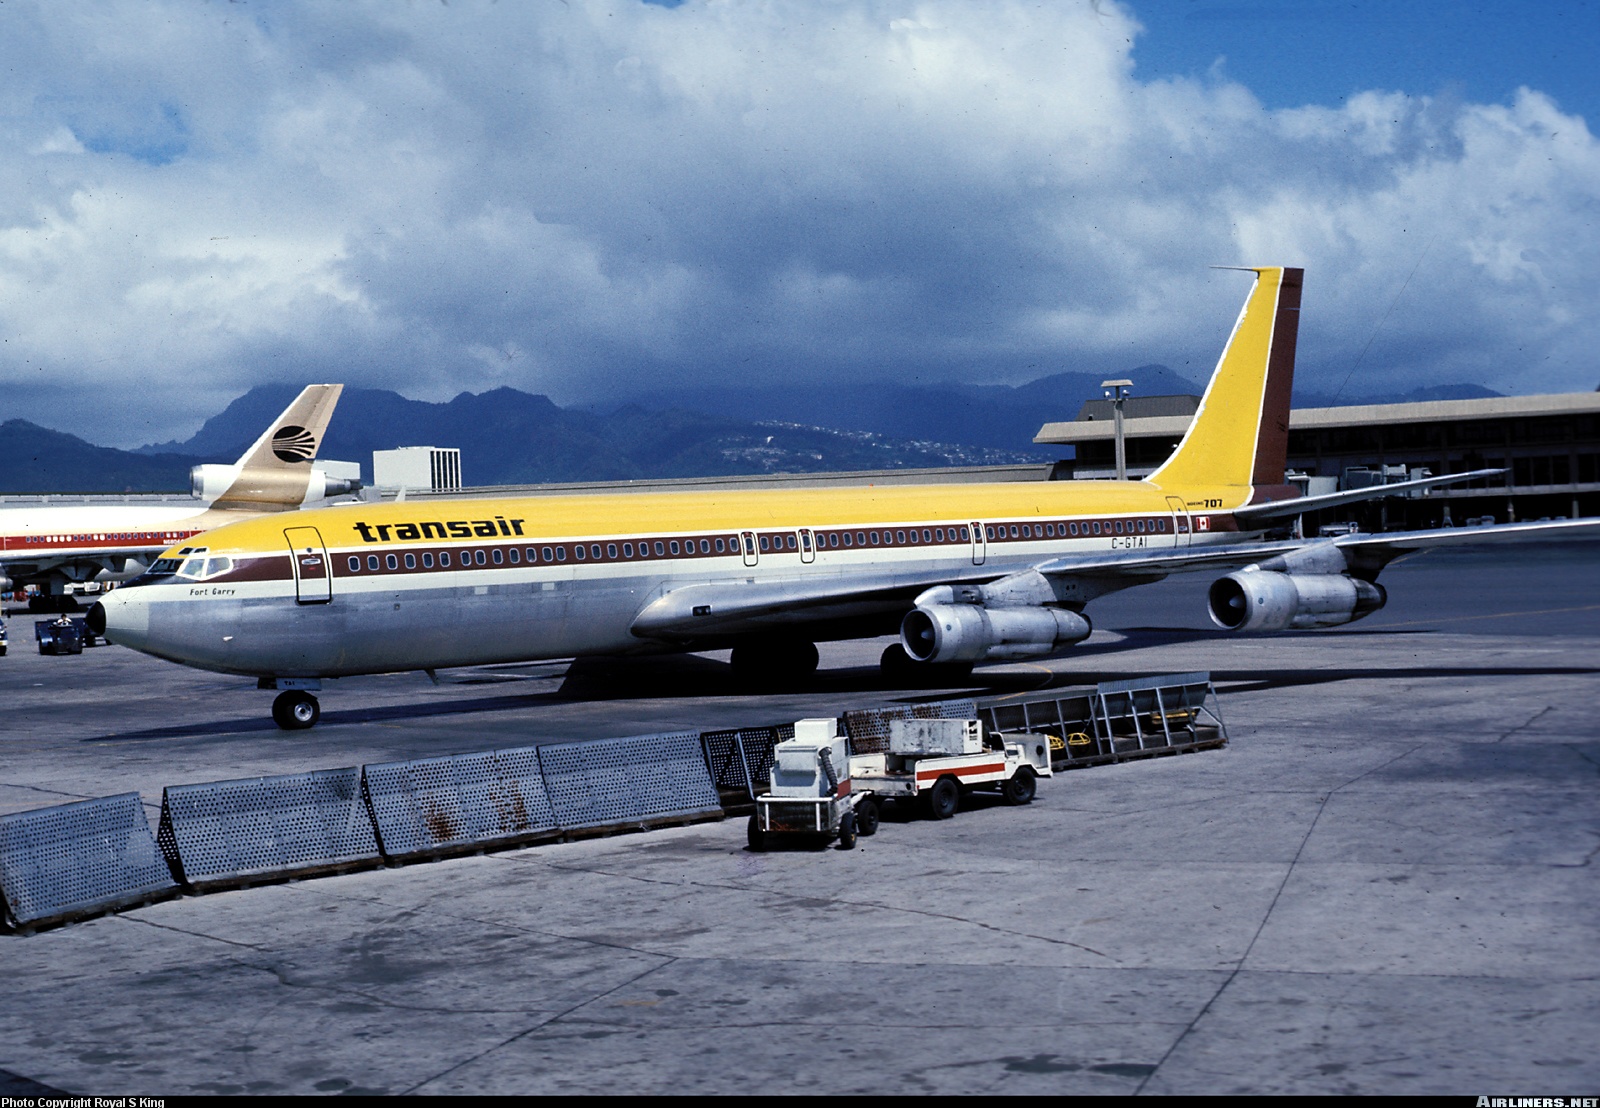 boeing-707-351c-transair-aviation-photo-0249646-airliners